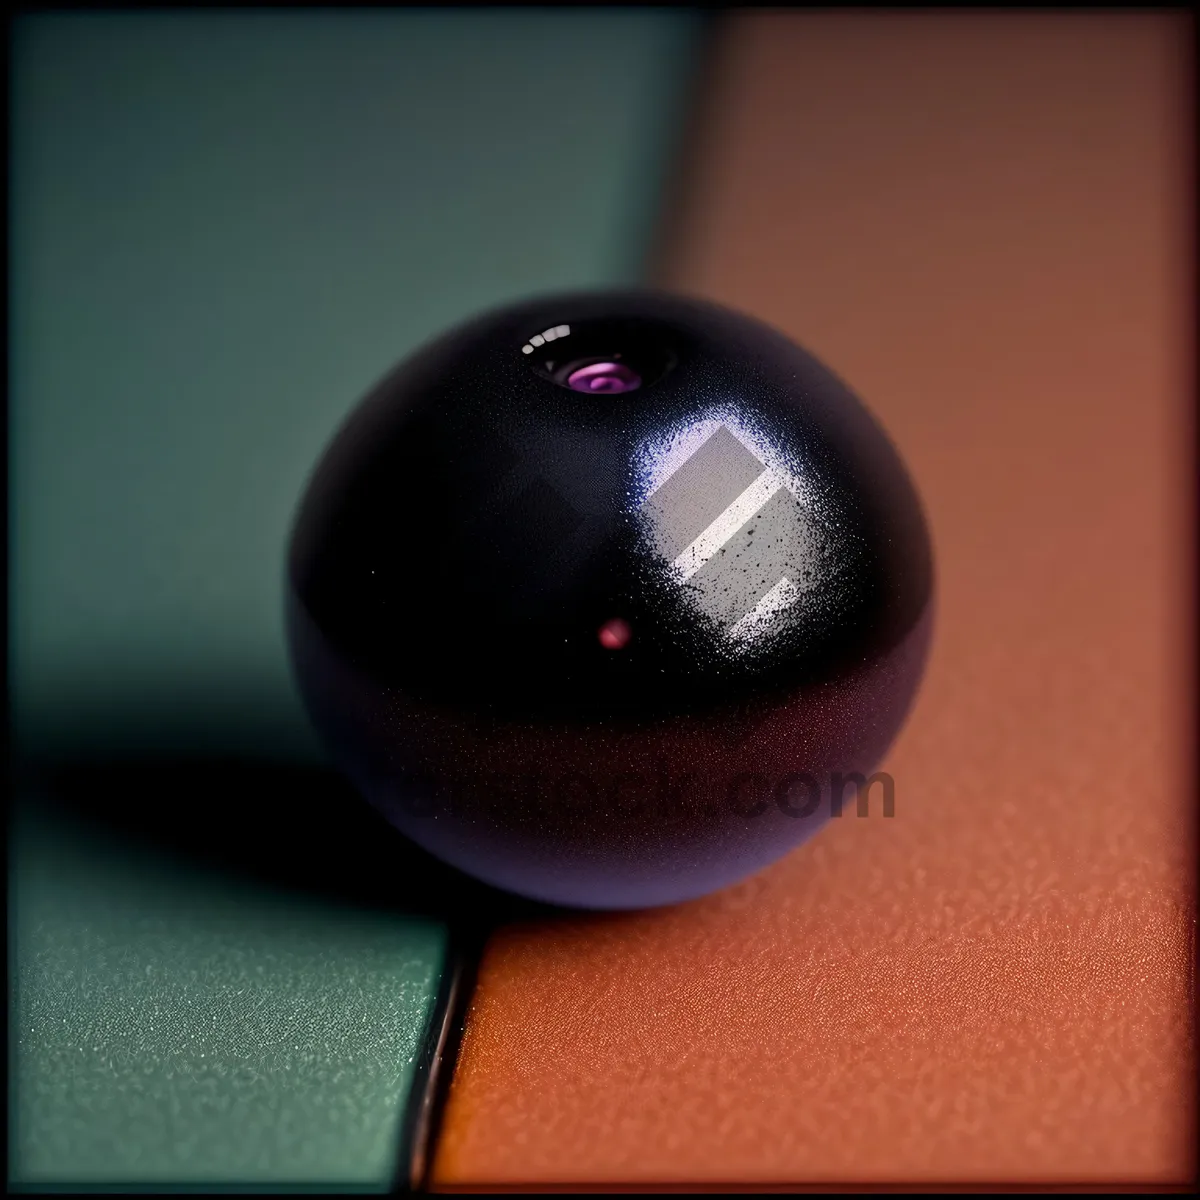 Picture of Billiard Ball on Pool Table: Eight Ball Challenge